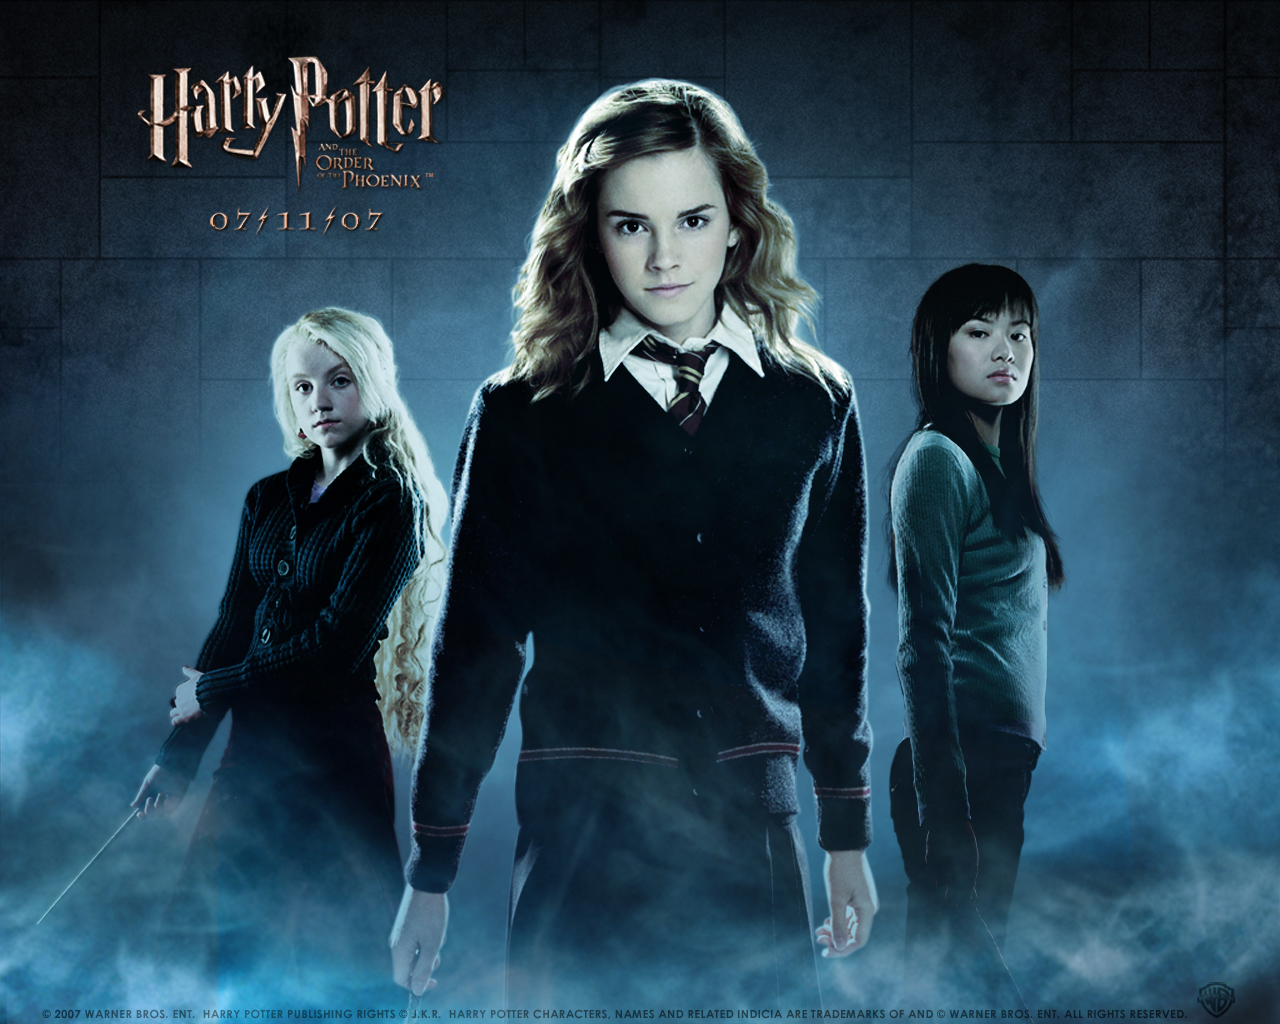 Watch Movie Harry Potter and the Deathly Hallows: Part 1 Online Streaming